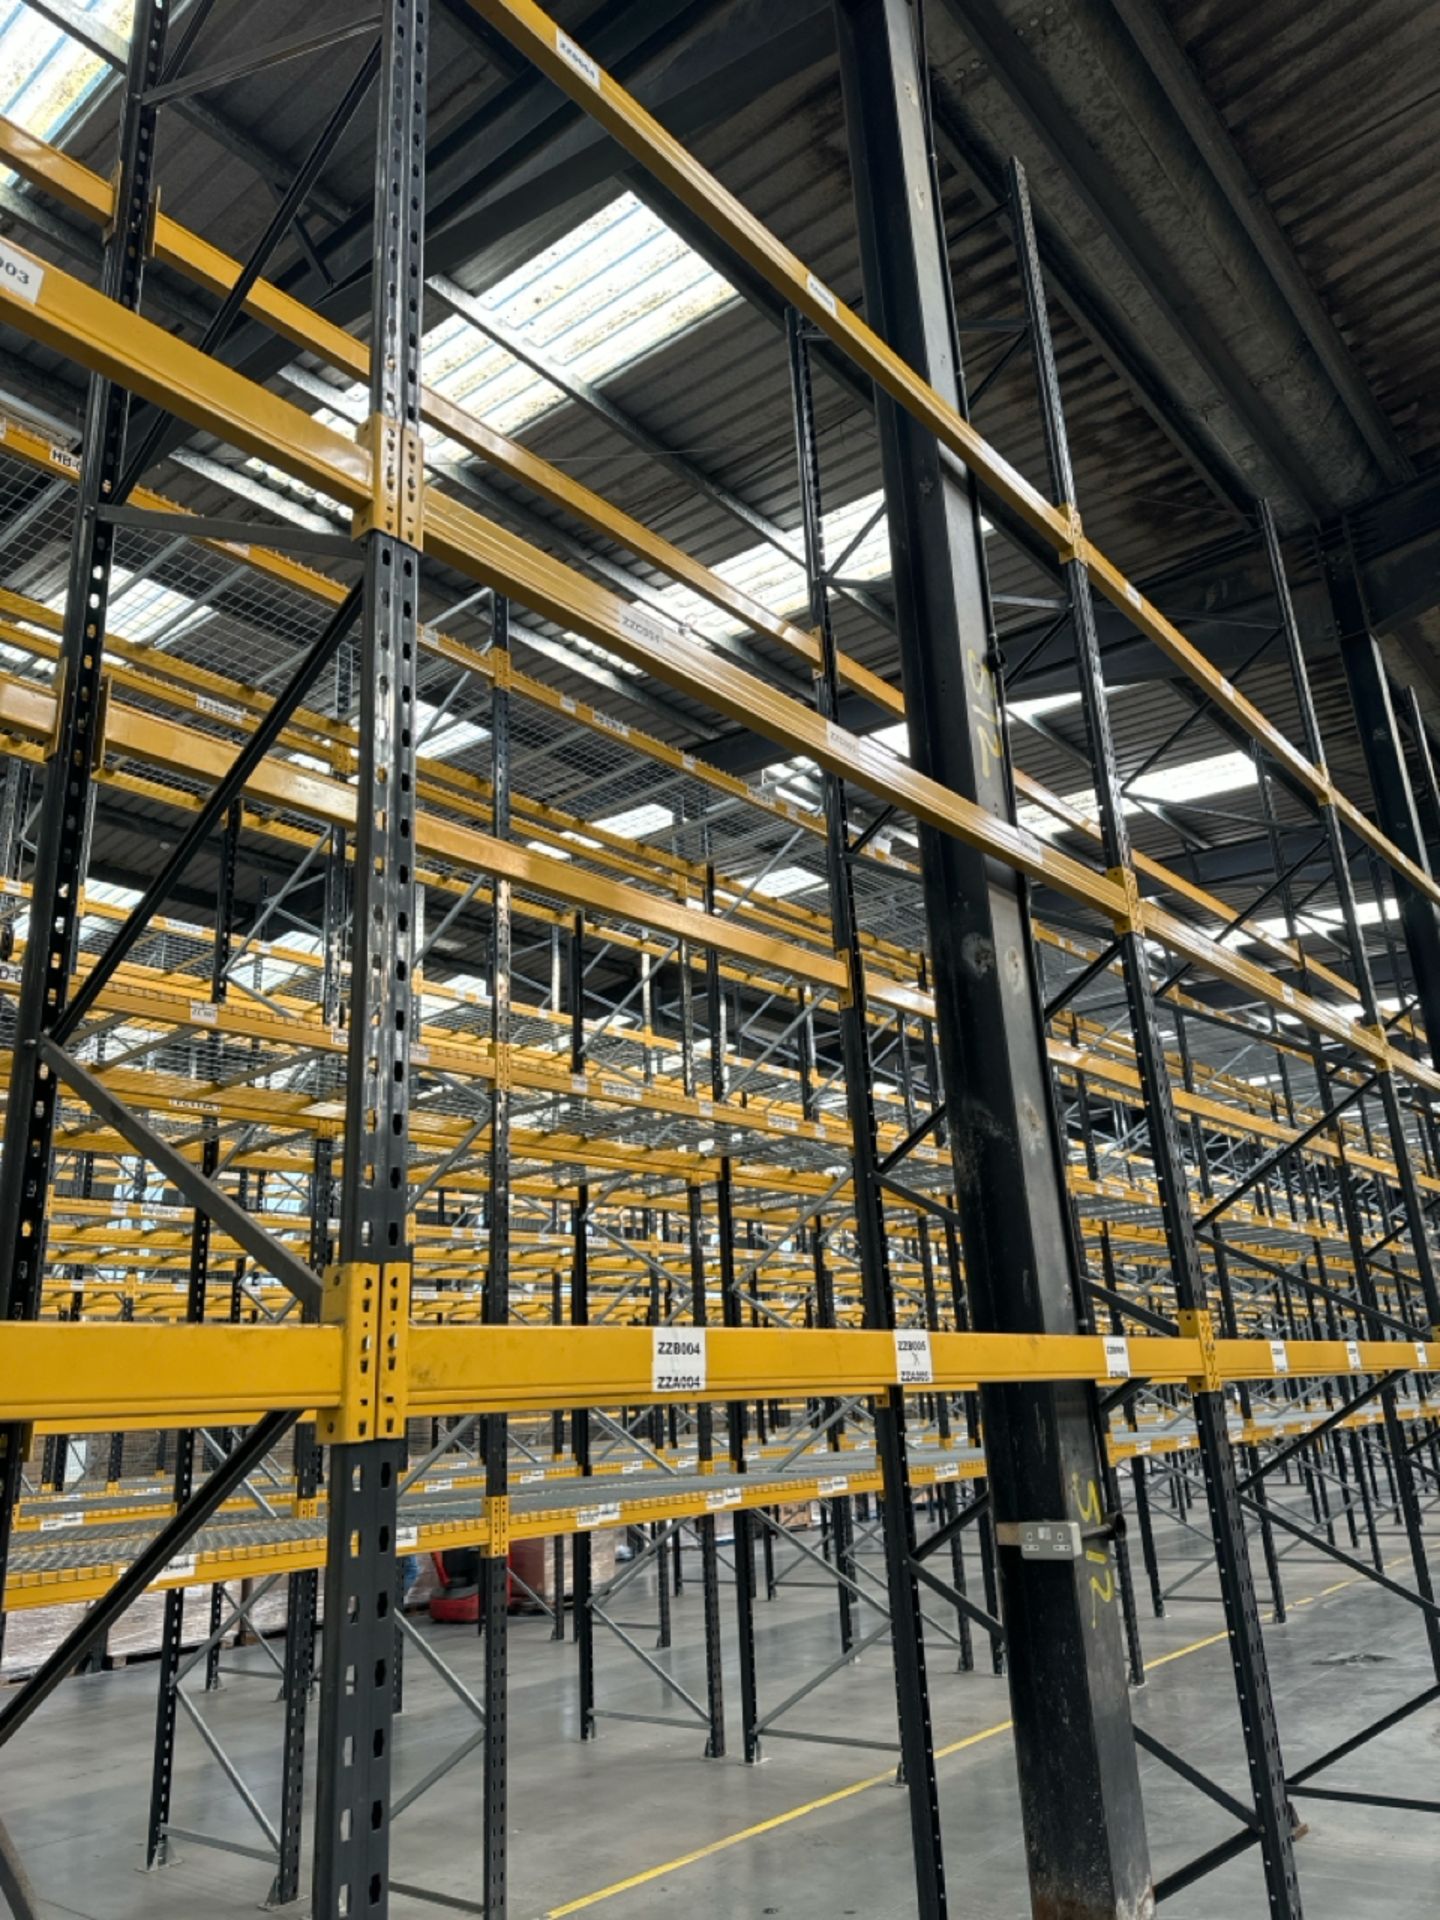 20 Bays Of Boltless Industrial Pallet Racking - Image 6 of 9